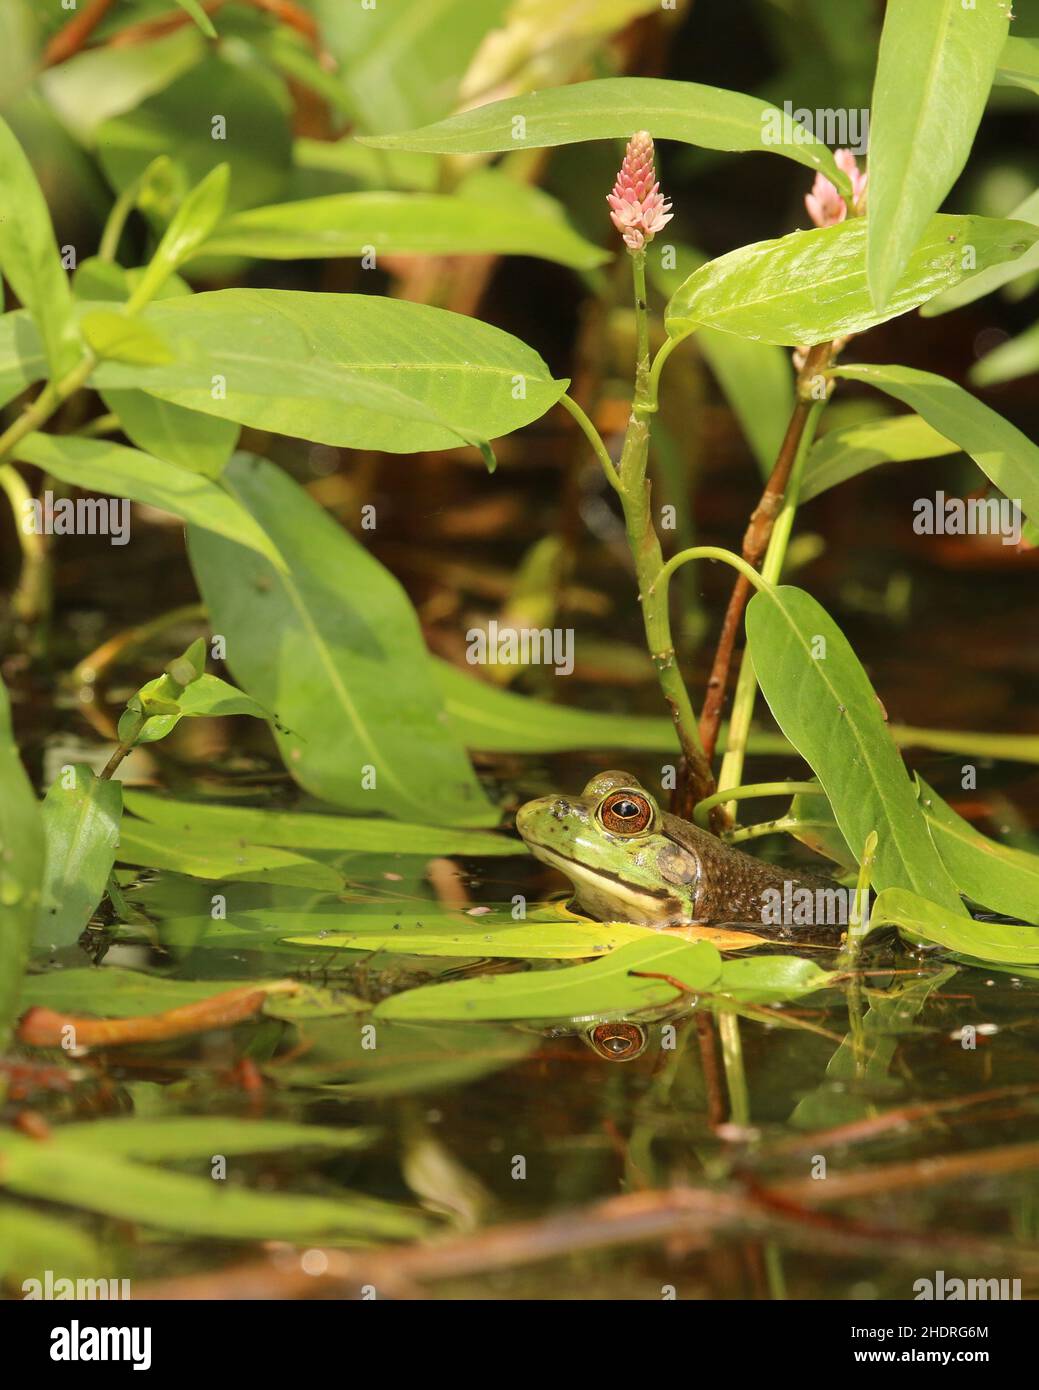 An American Bullfrog peeking its eyes and head above the surface of a calm pond or lake with its reflection in the water and plants around it. Stock Photo